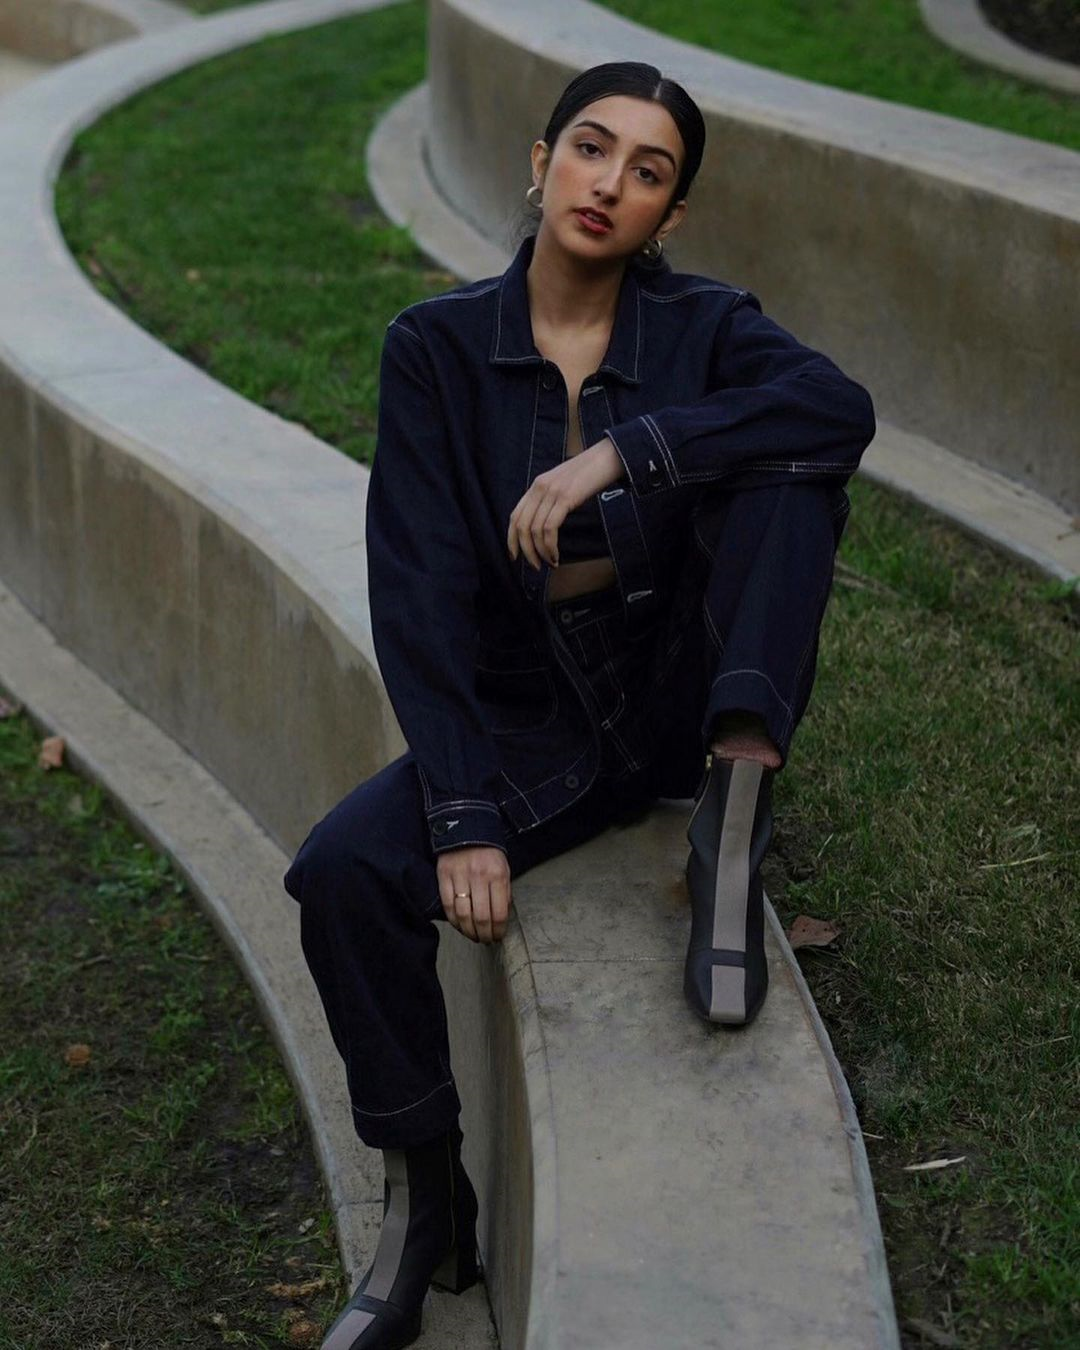 Woman in a dark denim outfit sitting on a wall made of grey stone and grass